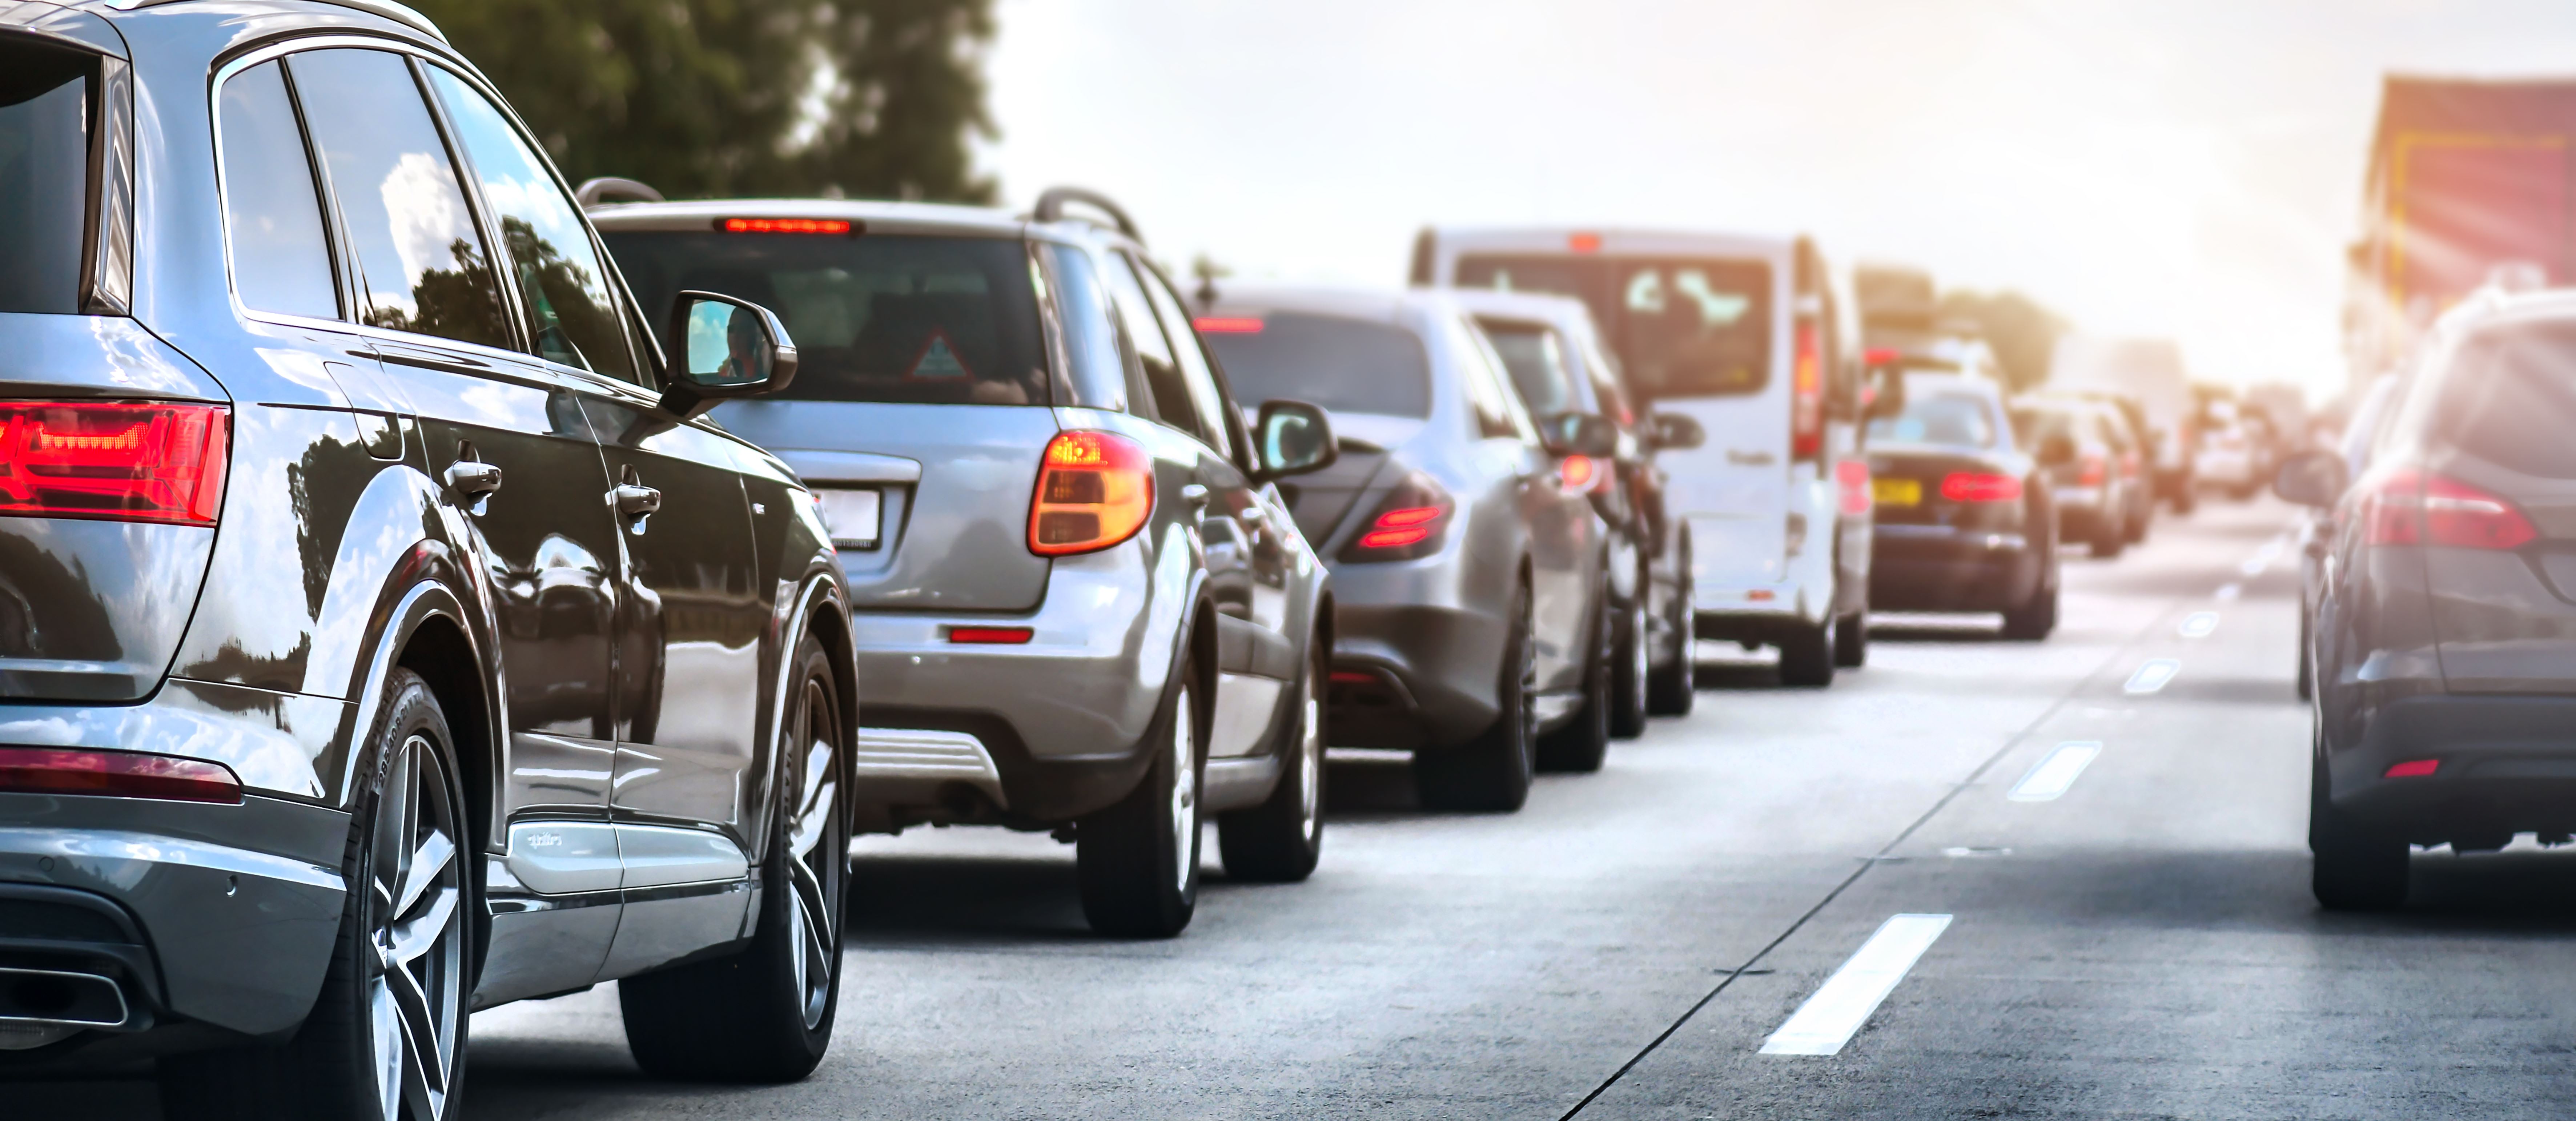 How to Drive Safely in Bumper-to-Bumper Traffic - Safer America